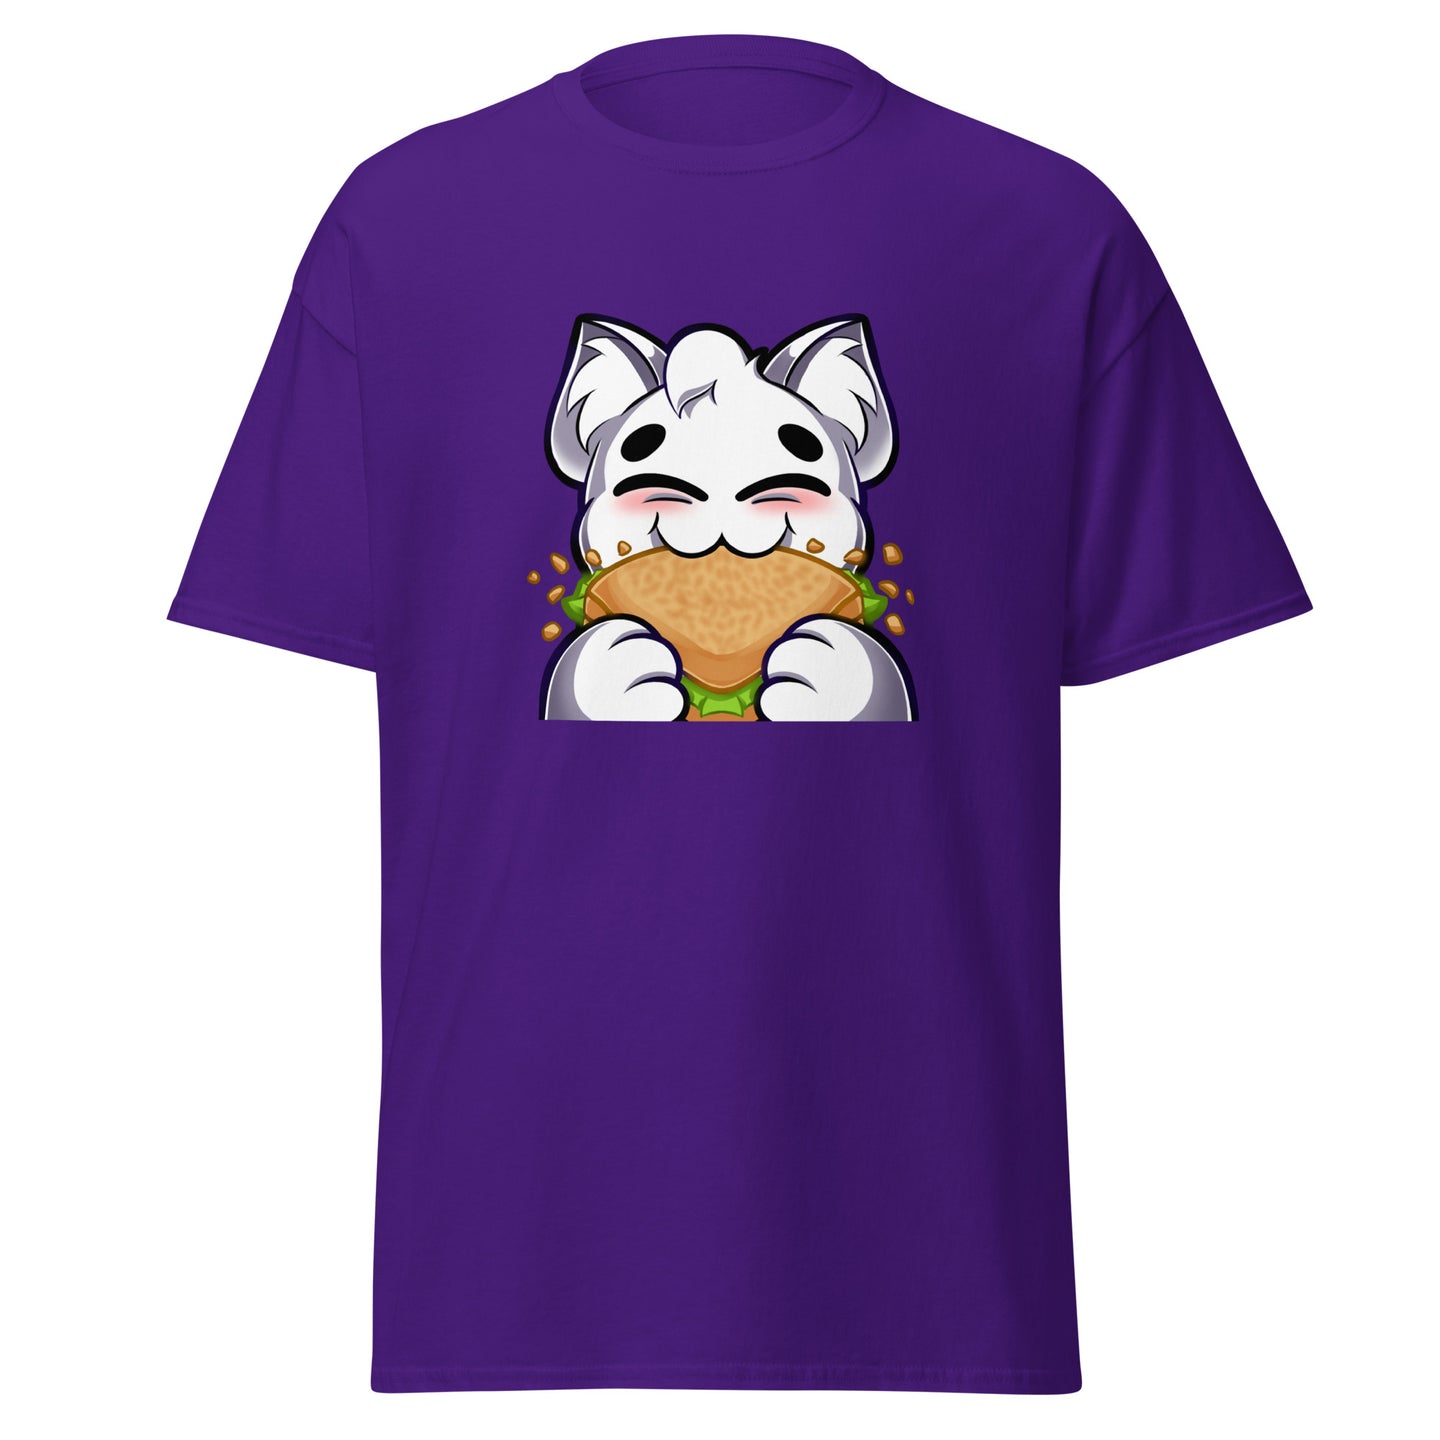 Gamer's Edition T-Shirt with Adorable Sandwich-Munching Cat